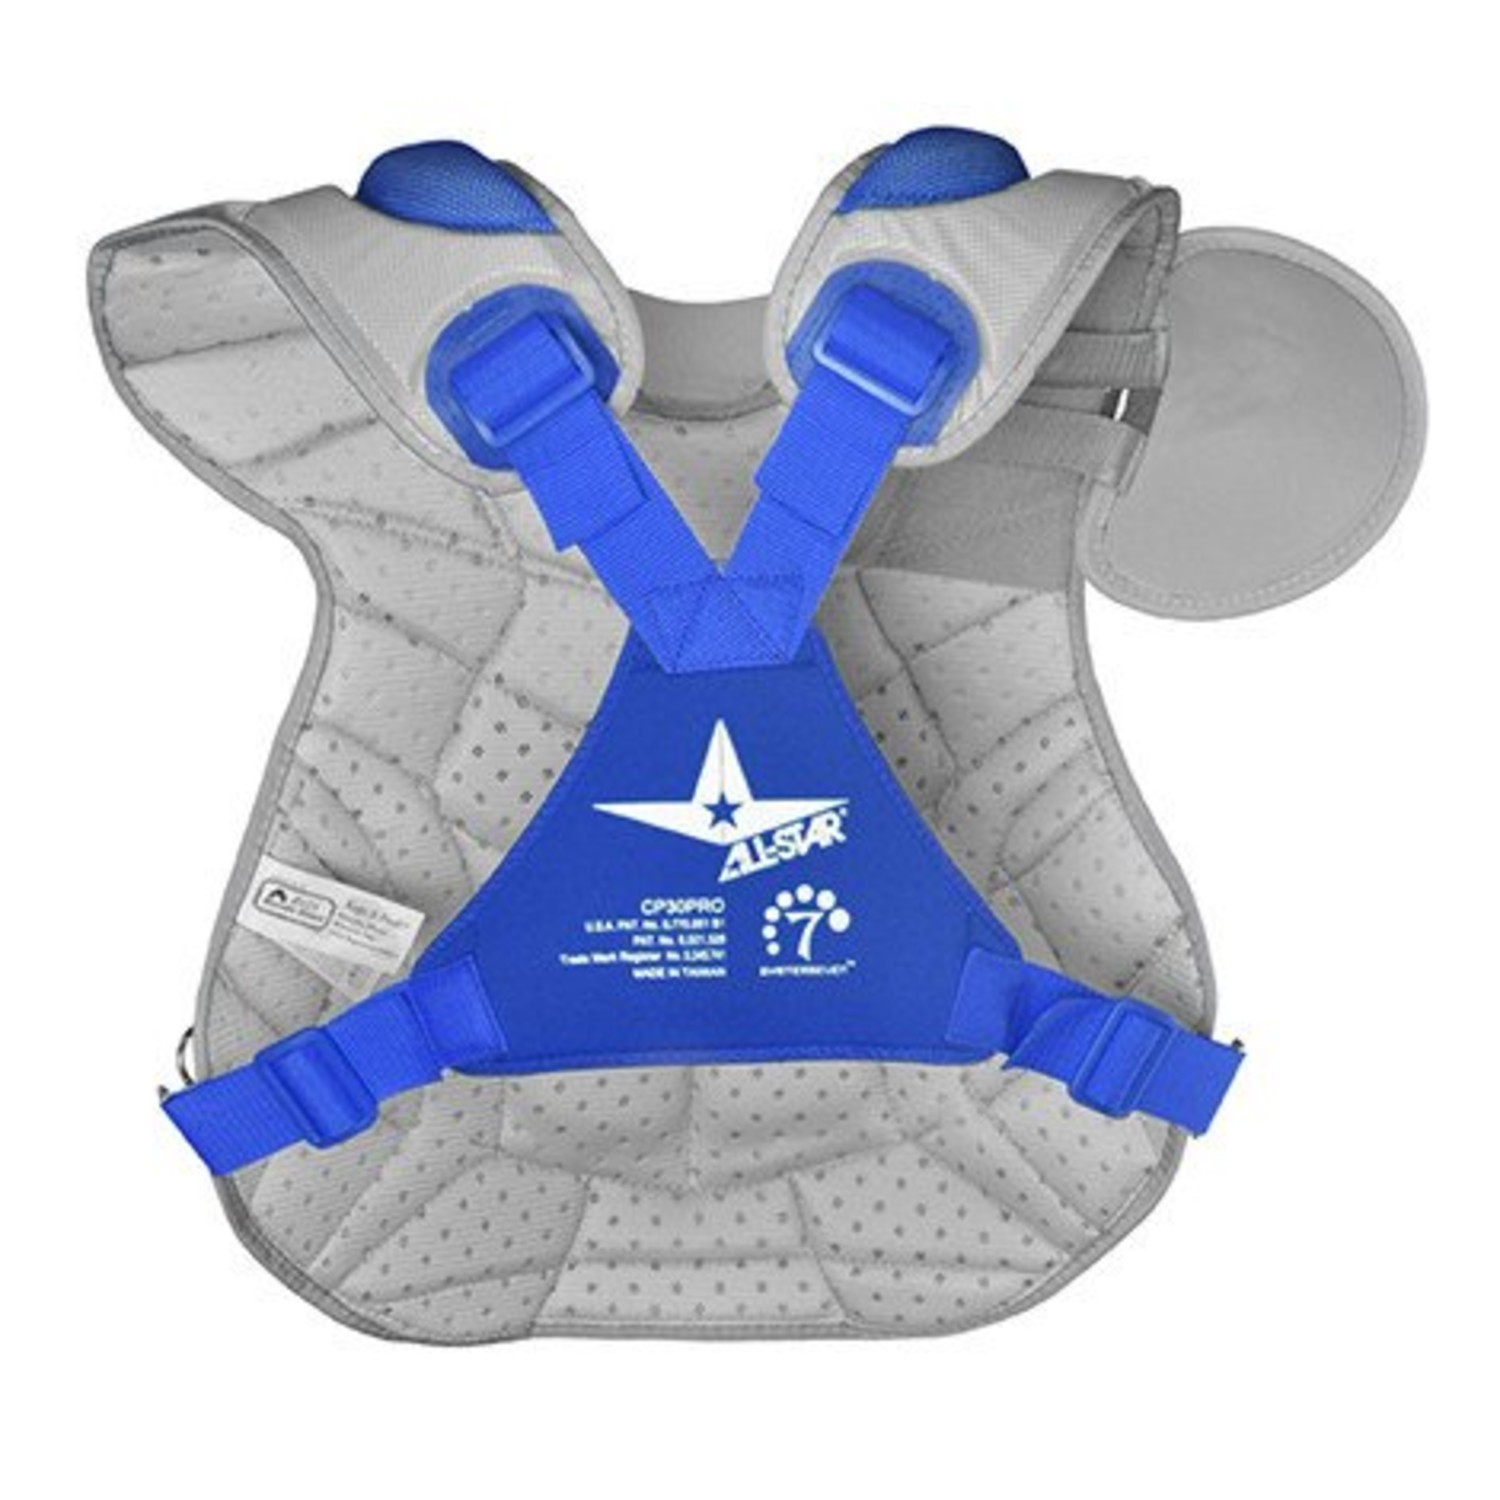 All-Star Player's Series 15.5 inch Chest Protector - CPCC1216PS - Navy